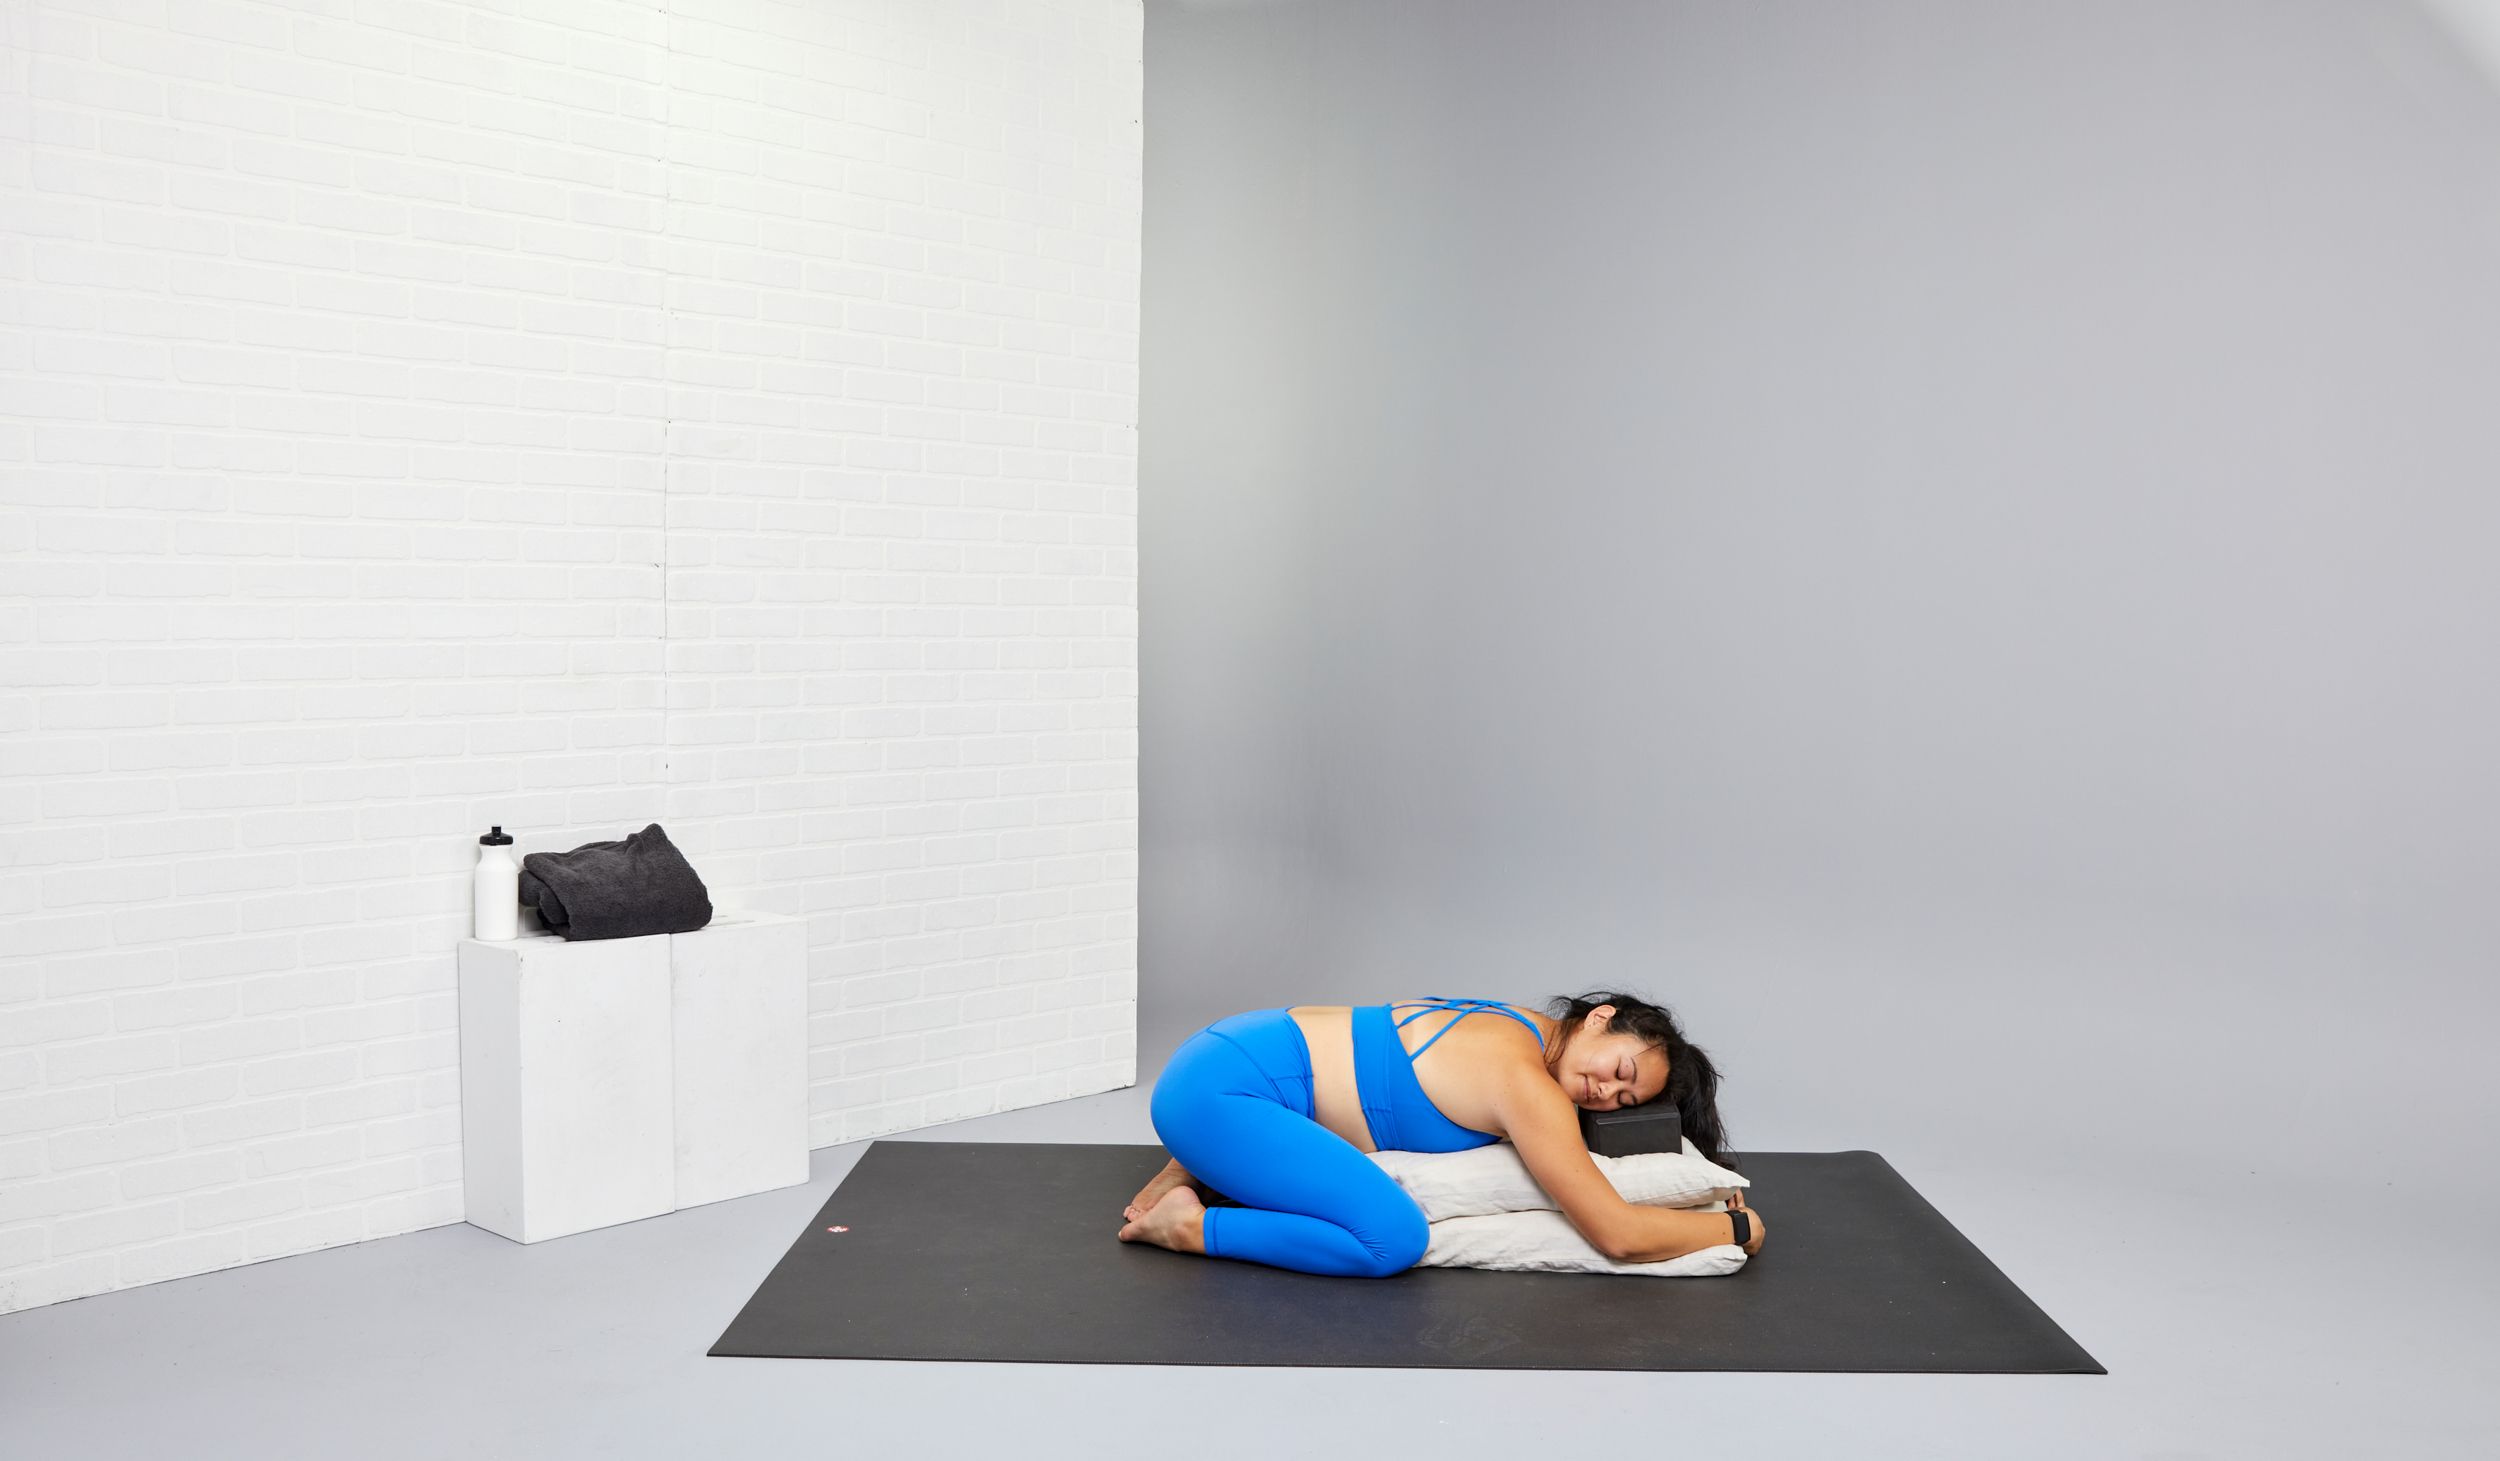 Relax & Restore: 7 Supine Yoga Poses and Their Benefits